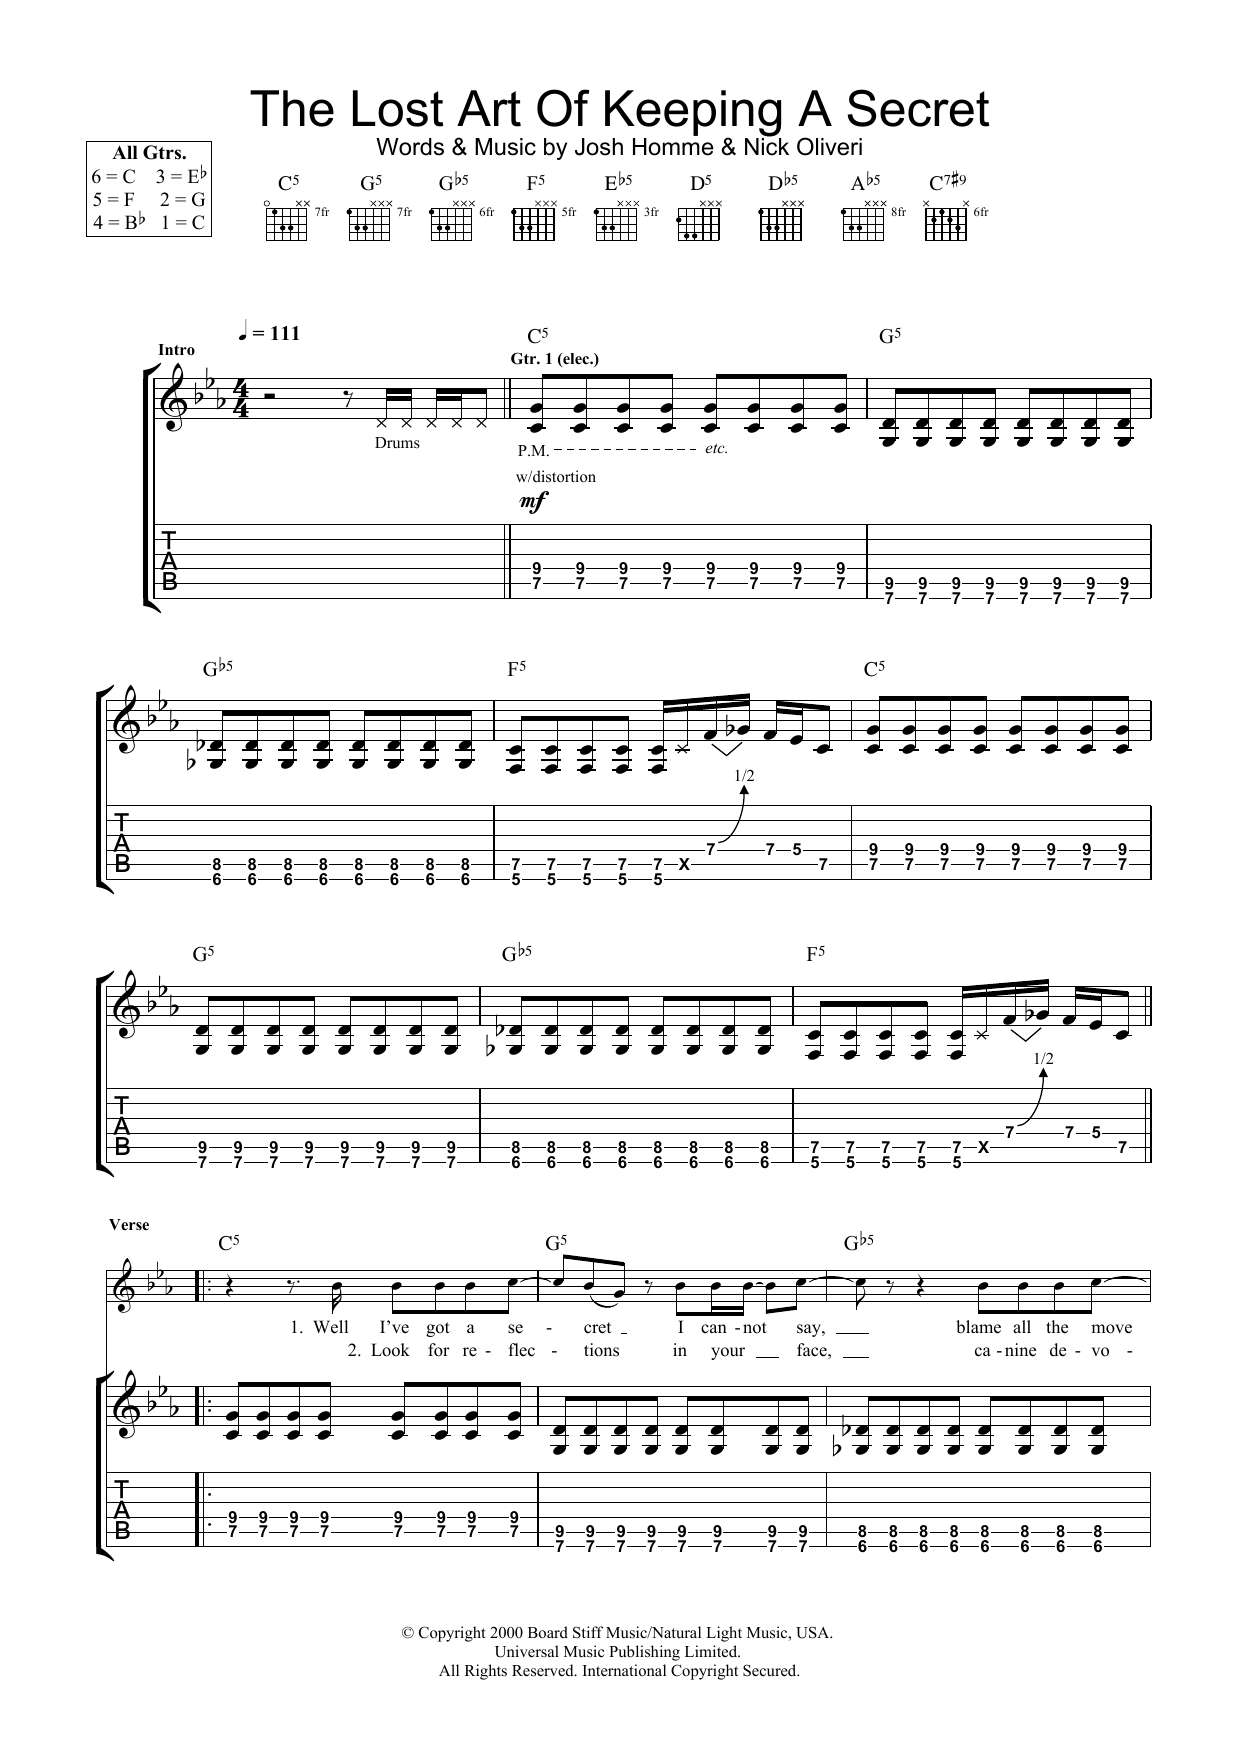 Download Queens Of The Stone Age The Lost Art Of Keeping A Secret Sheet Music